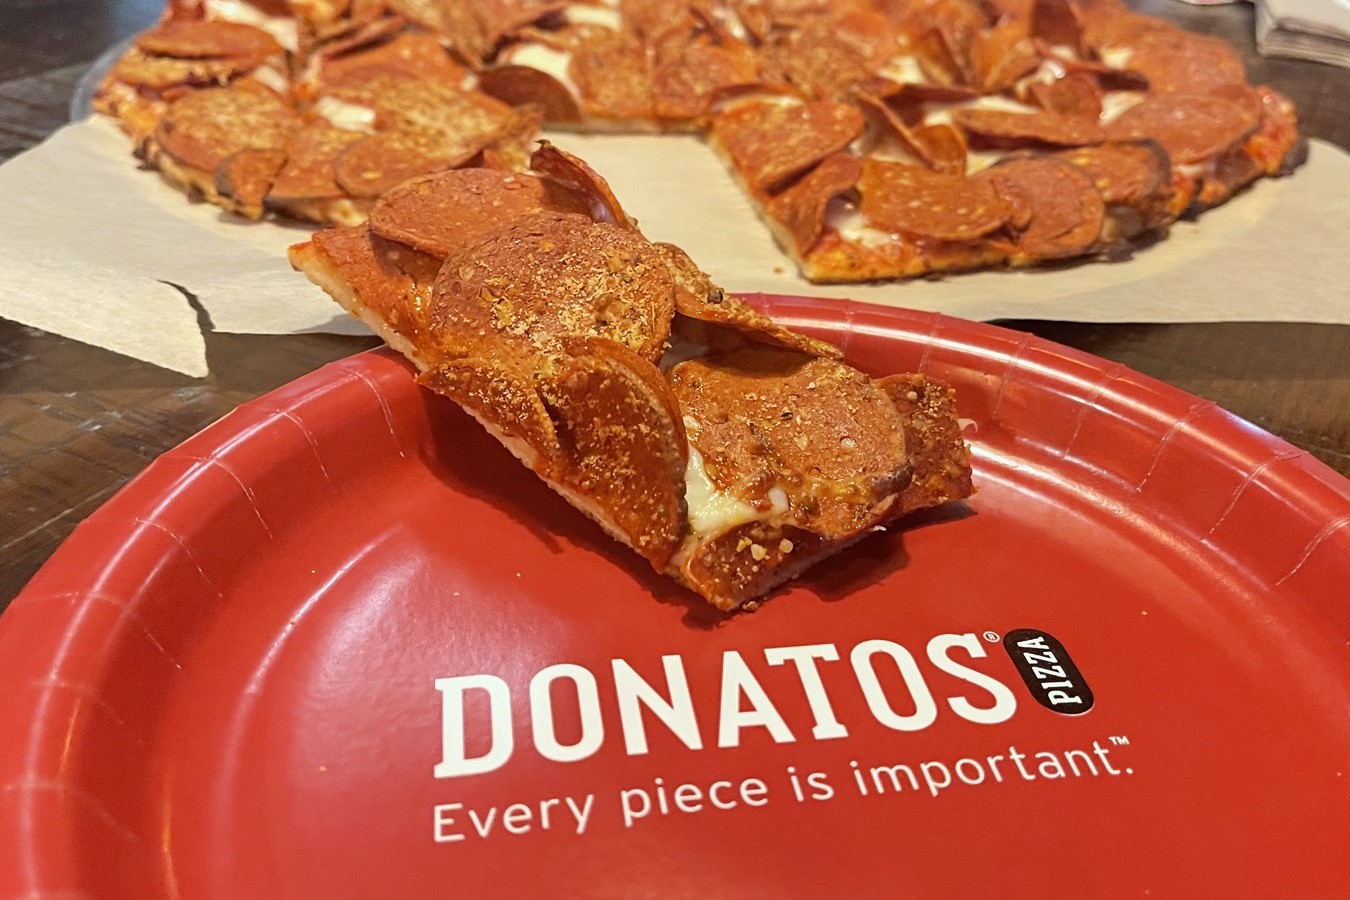 10-donatos-nutritional-facts